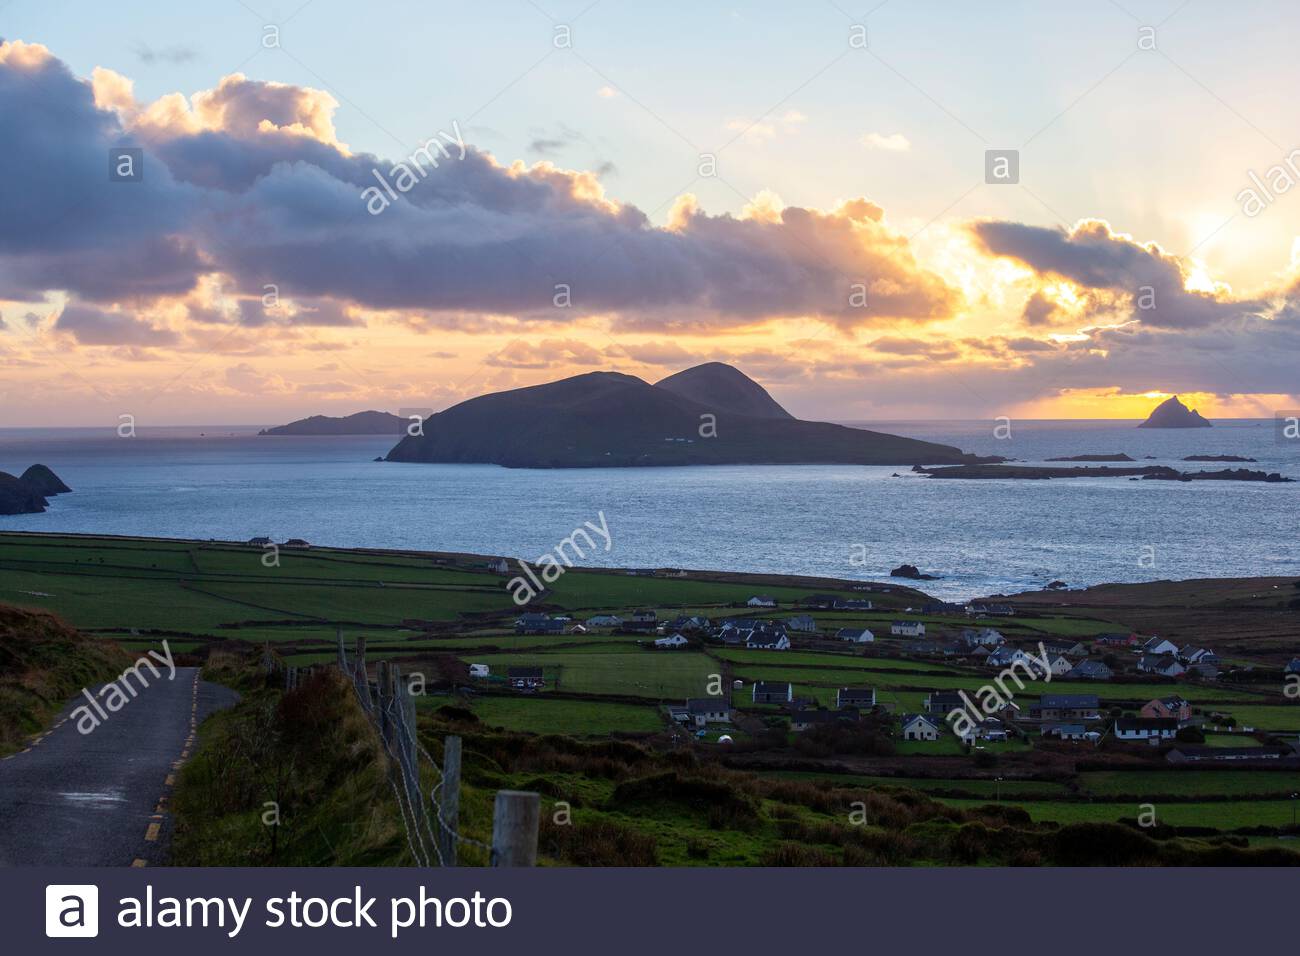 A view of the Irish-speaking village of Dunquin and the Great Blasket Island on a wonderful evening along the Wild Atlantic Way as the sun goes down. Stock Photo